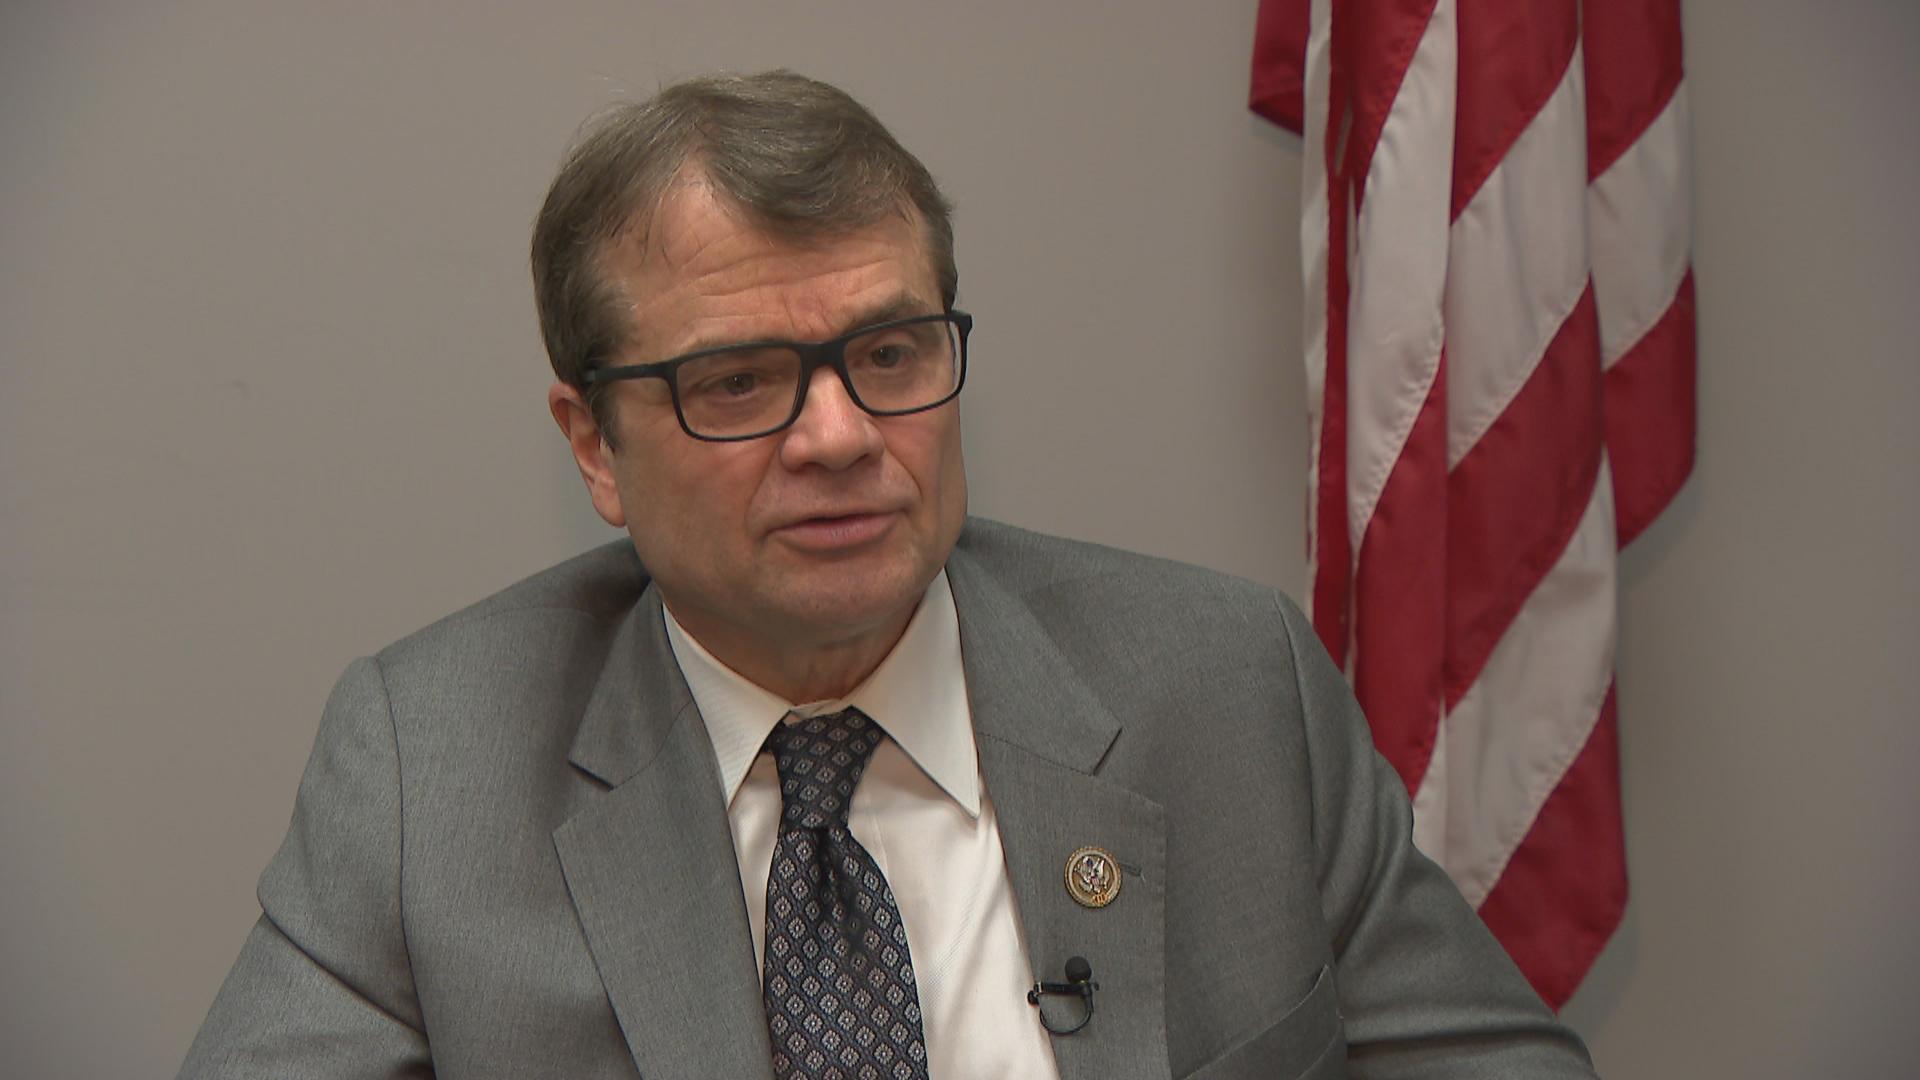 “There’s solid evidence of obstruction, there are clear examples of collusion and conspiracy,” said U.S. Rep. Mike Quigley of the redacted Mueller report released Thursday.